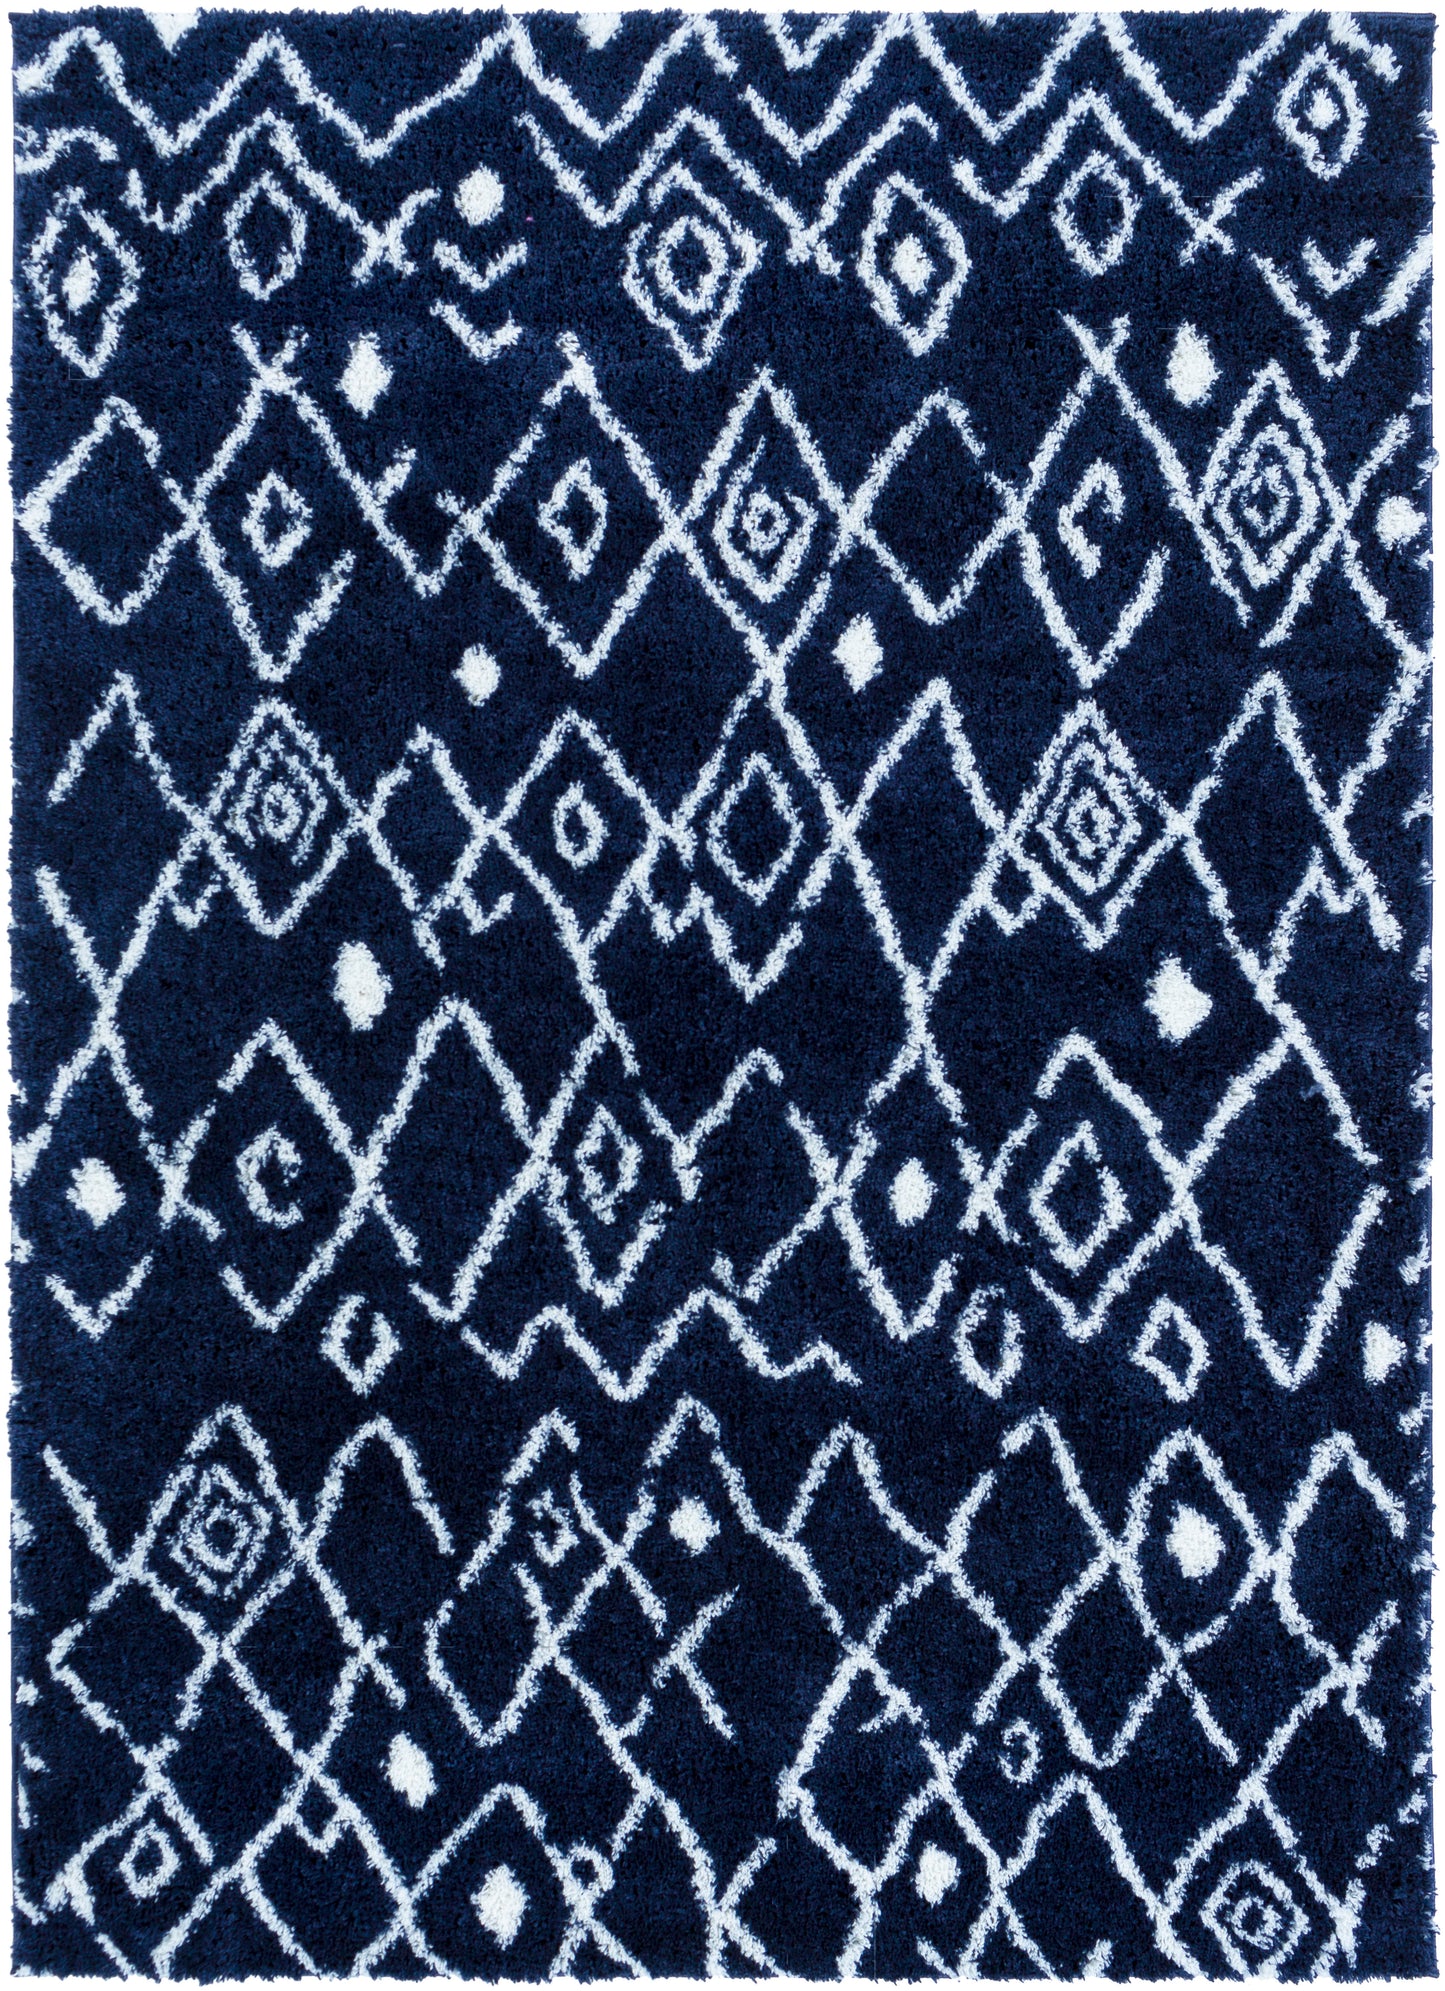 Aliyah shag 26309 Machine Woven Synthetic Blend Indoor Area Rug by Surya Rugs